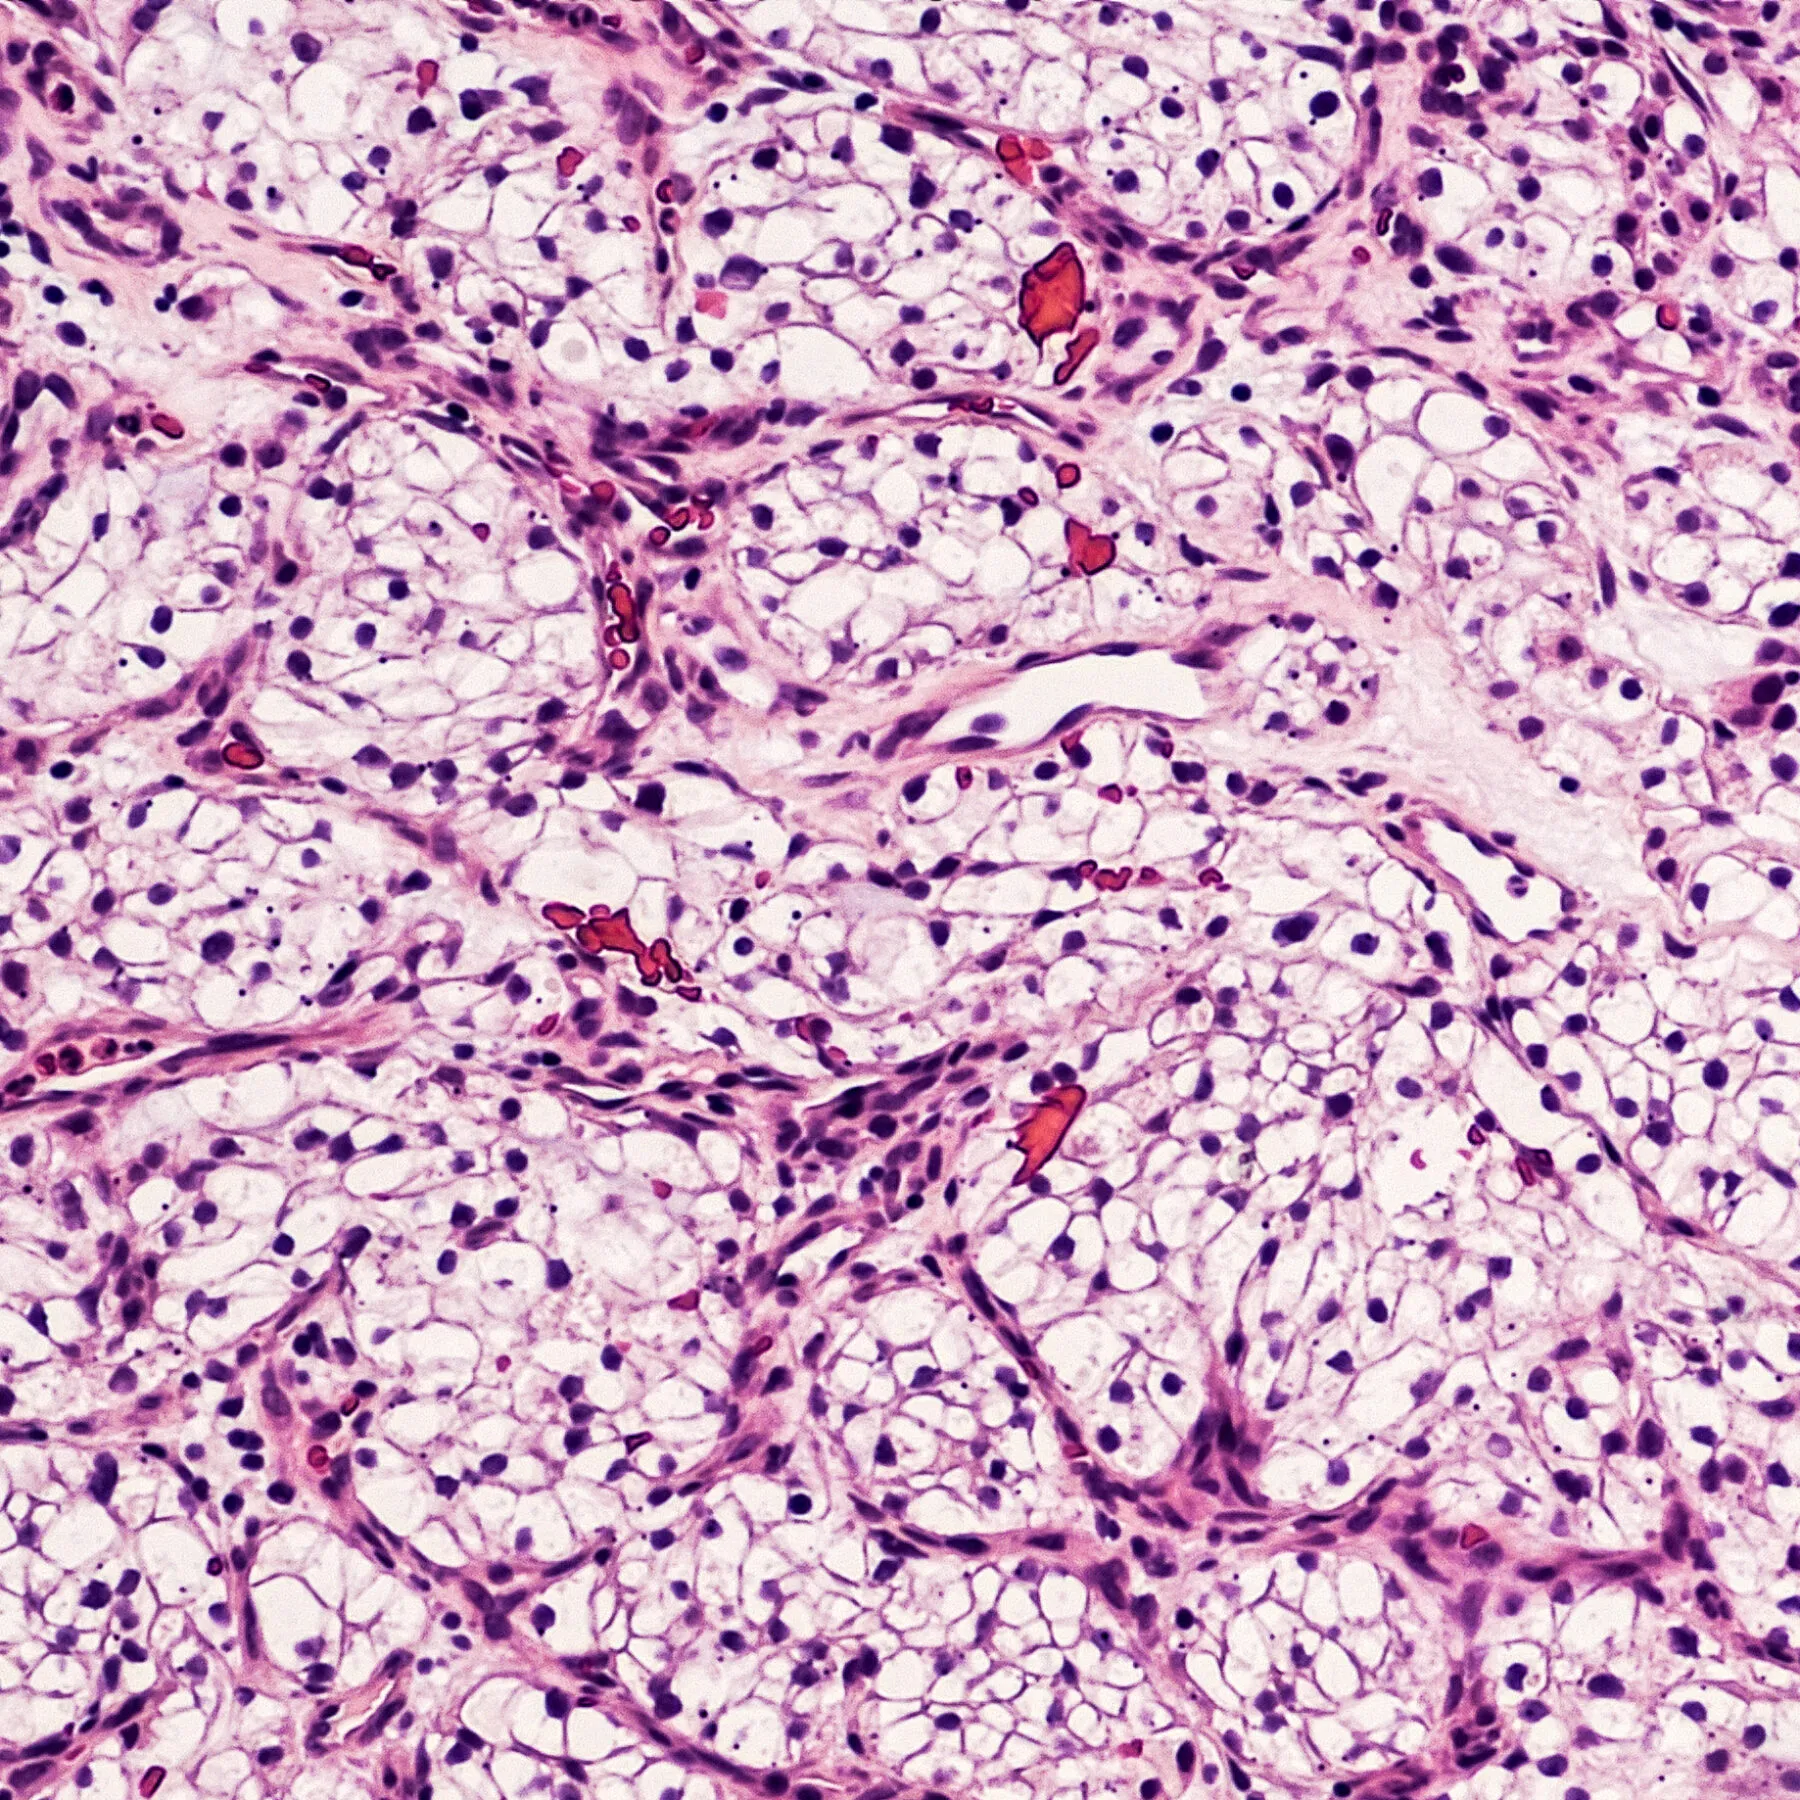 Microscopic image of clear cell carcinoma, the most common type of renal cell carcinoma